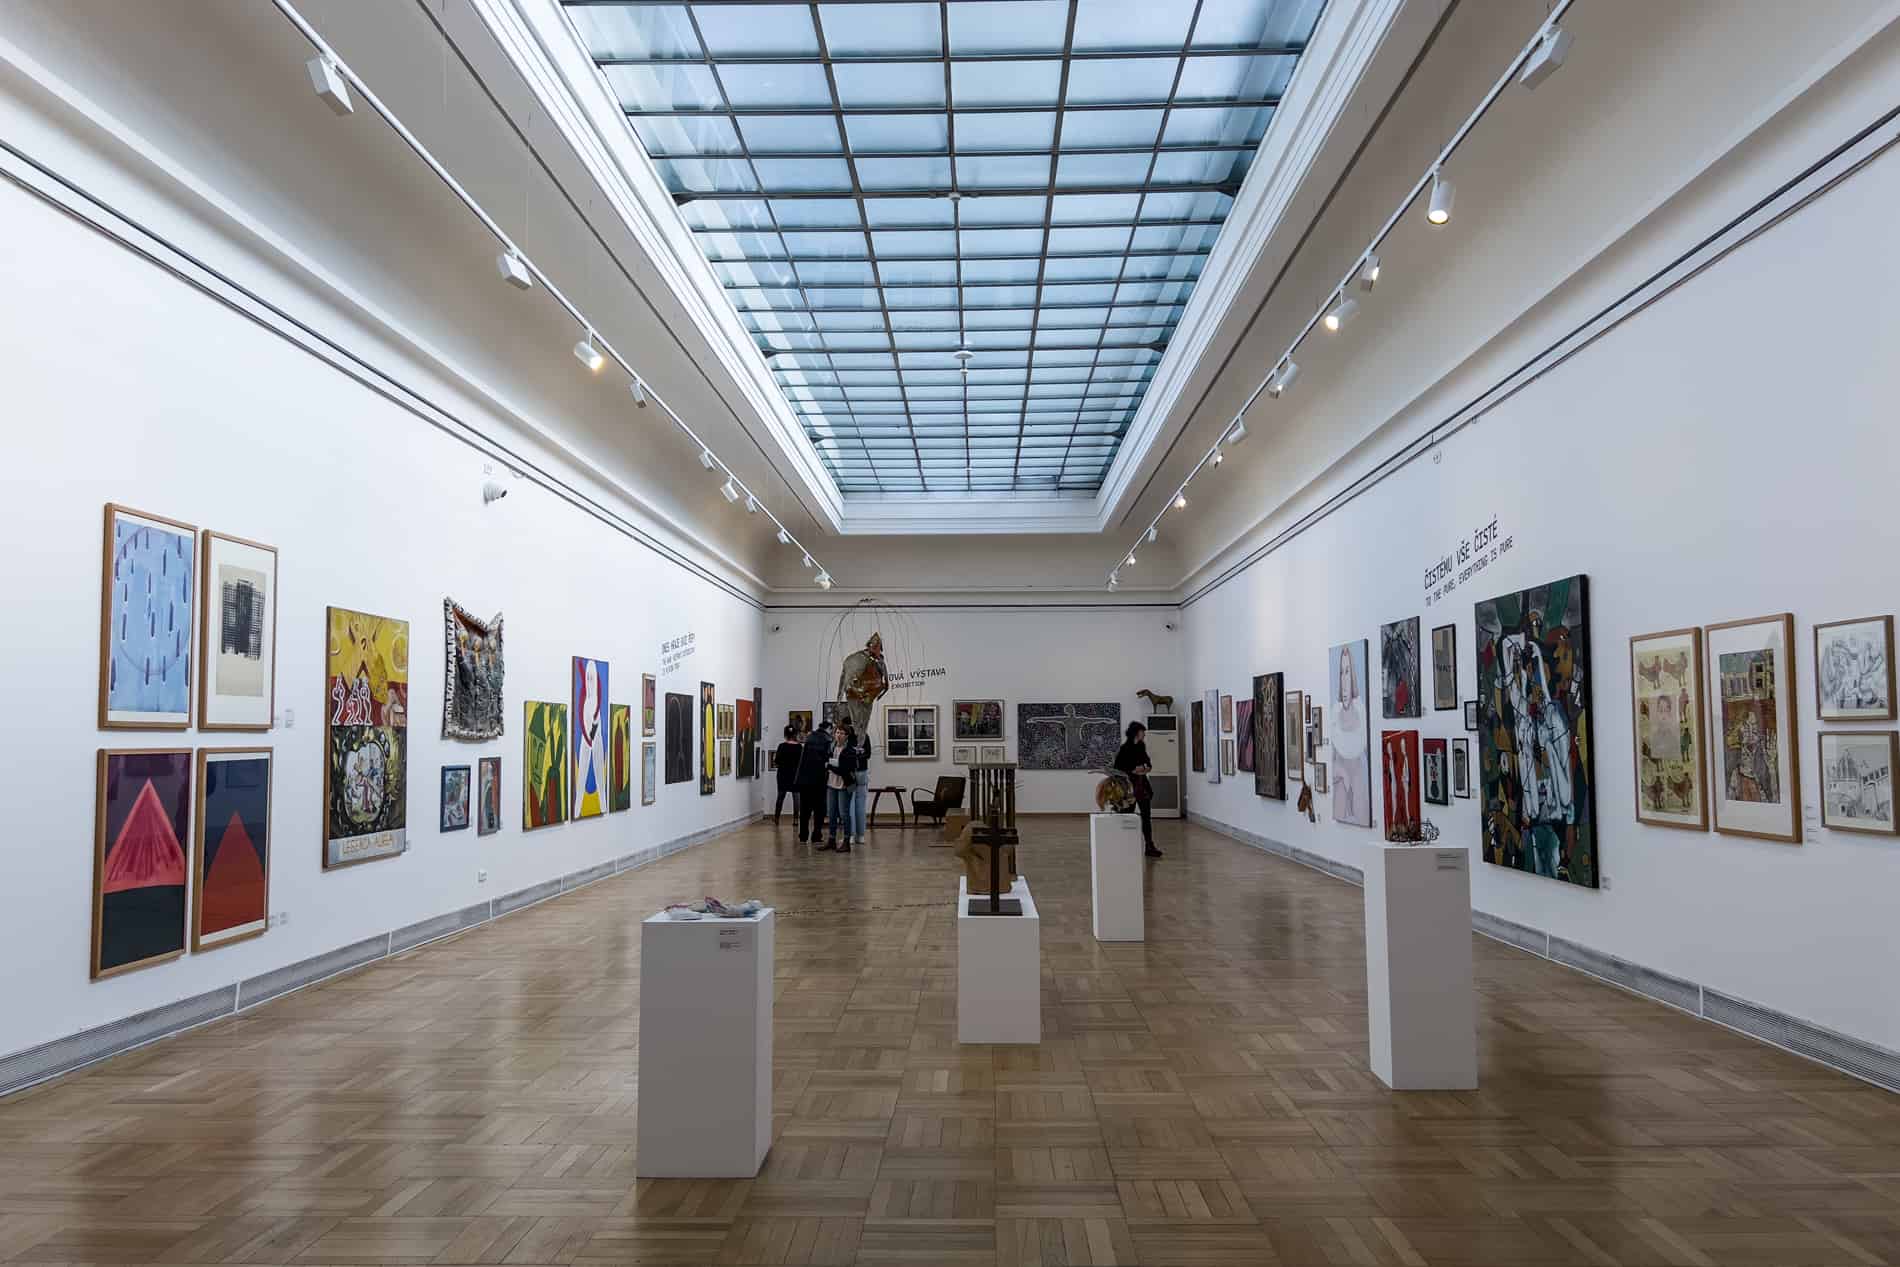 People browsing the paintings inside a modern art museum with whit walls and a glass ceiling. 